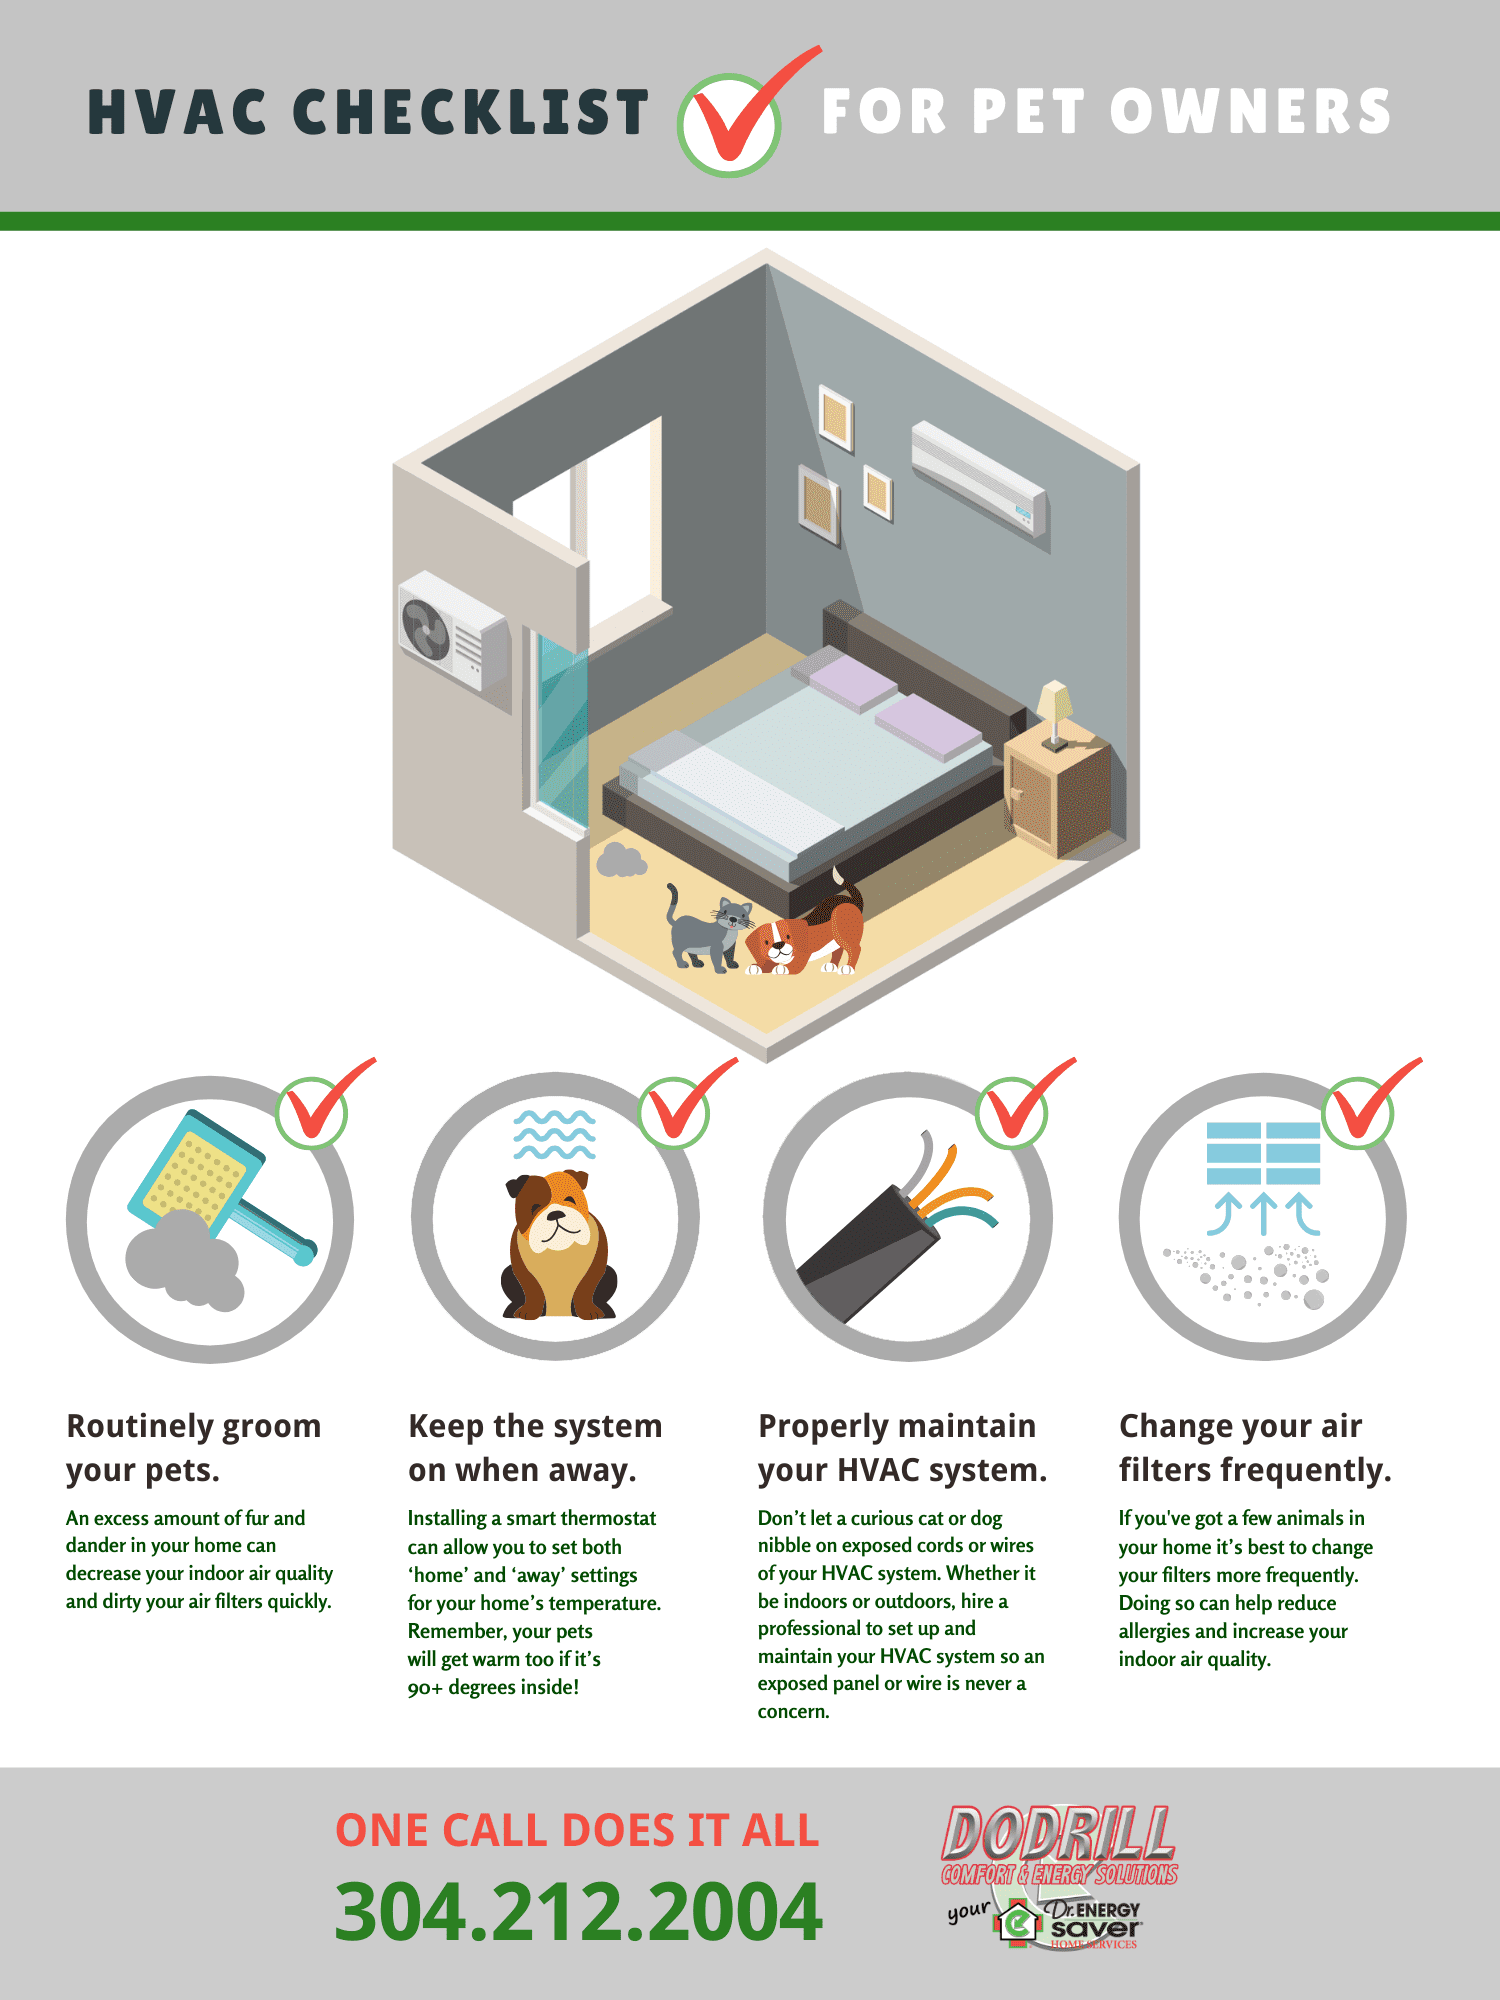 [INFOGRAPHIC] HVAC Checklist for Pet Owners